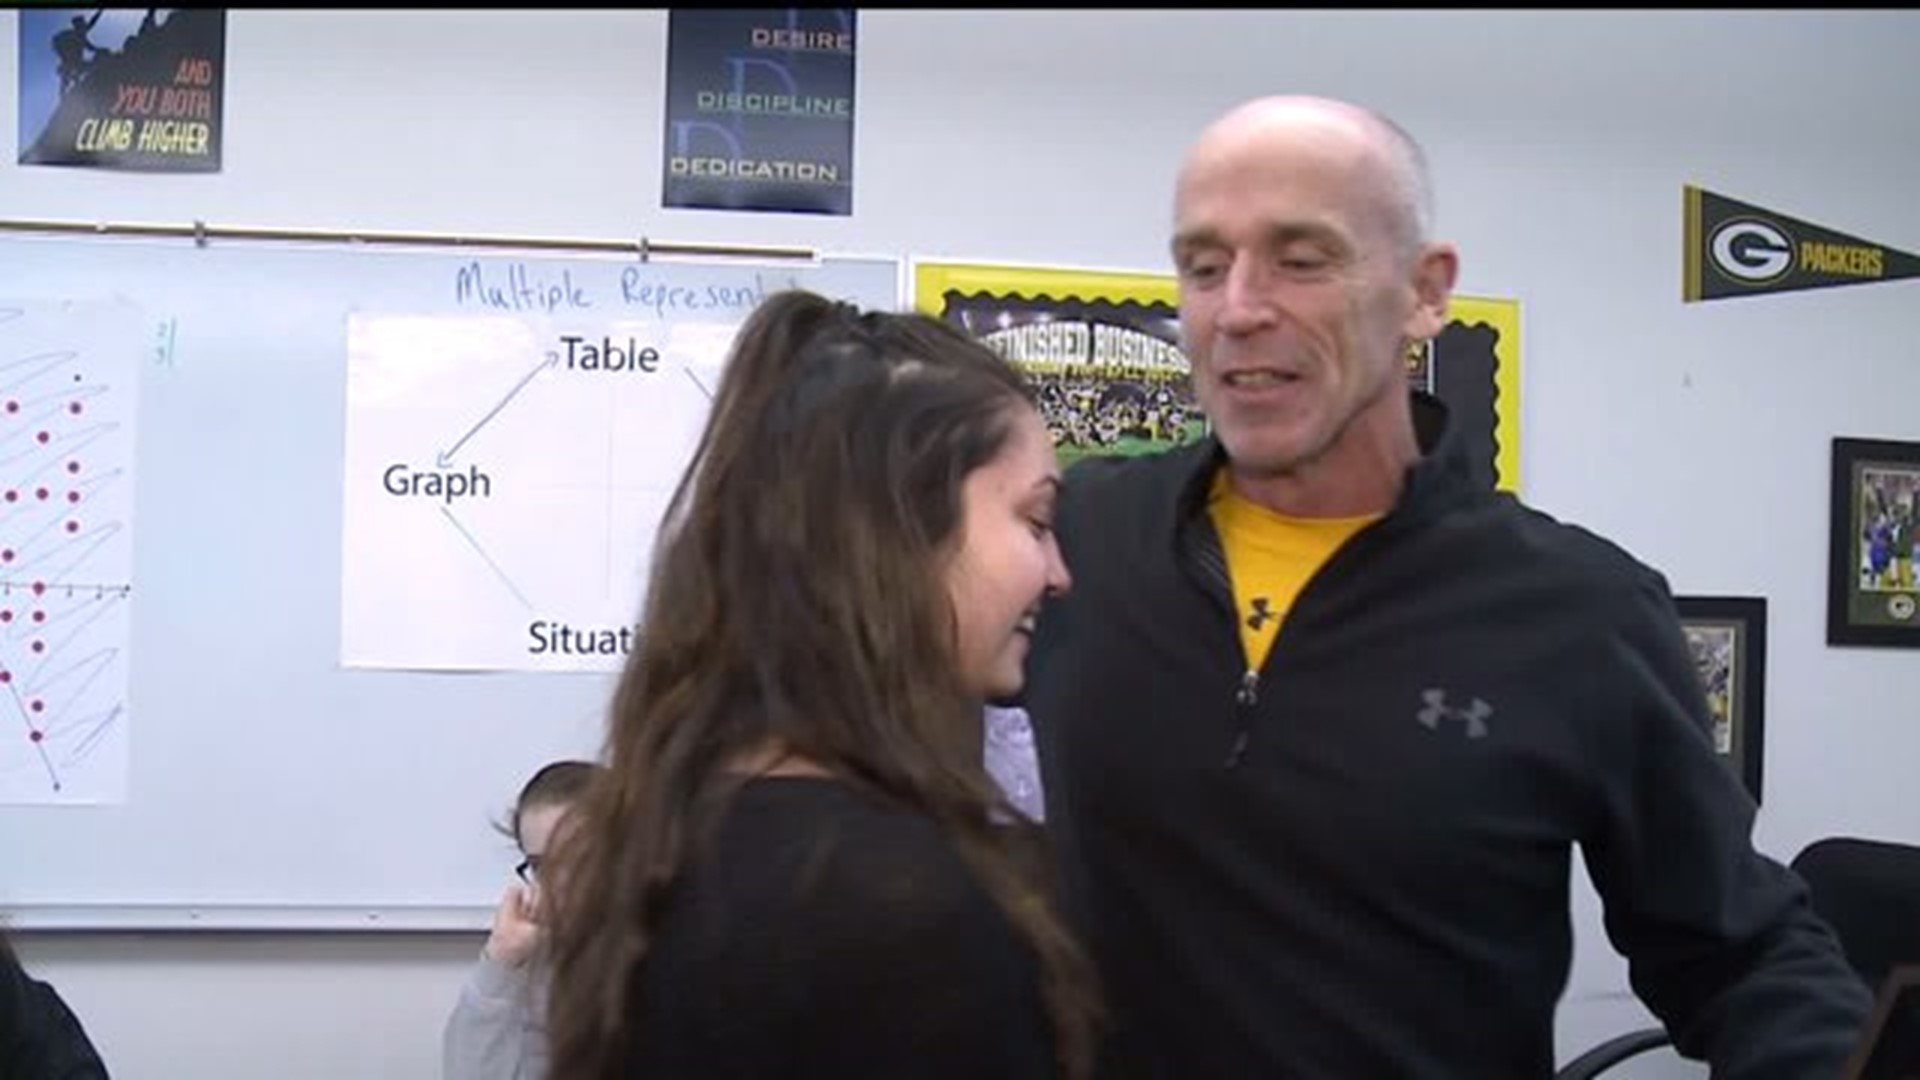 Teacher Helps Student Set Up March of Dimes Event